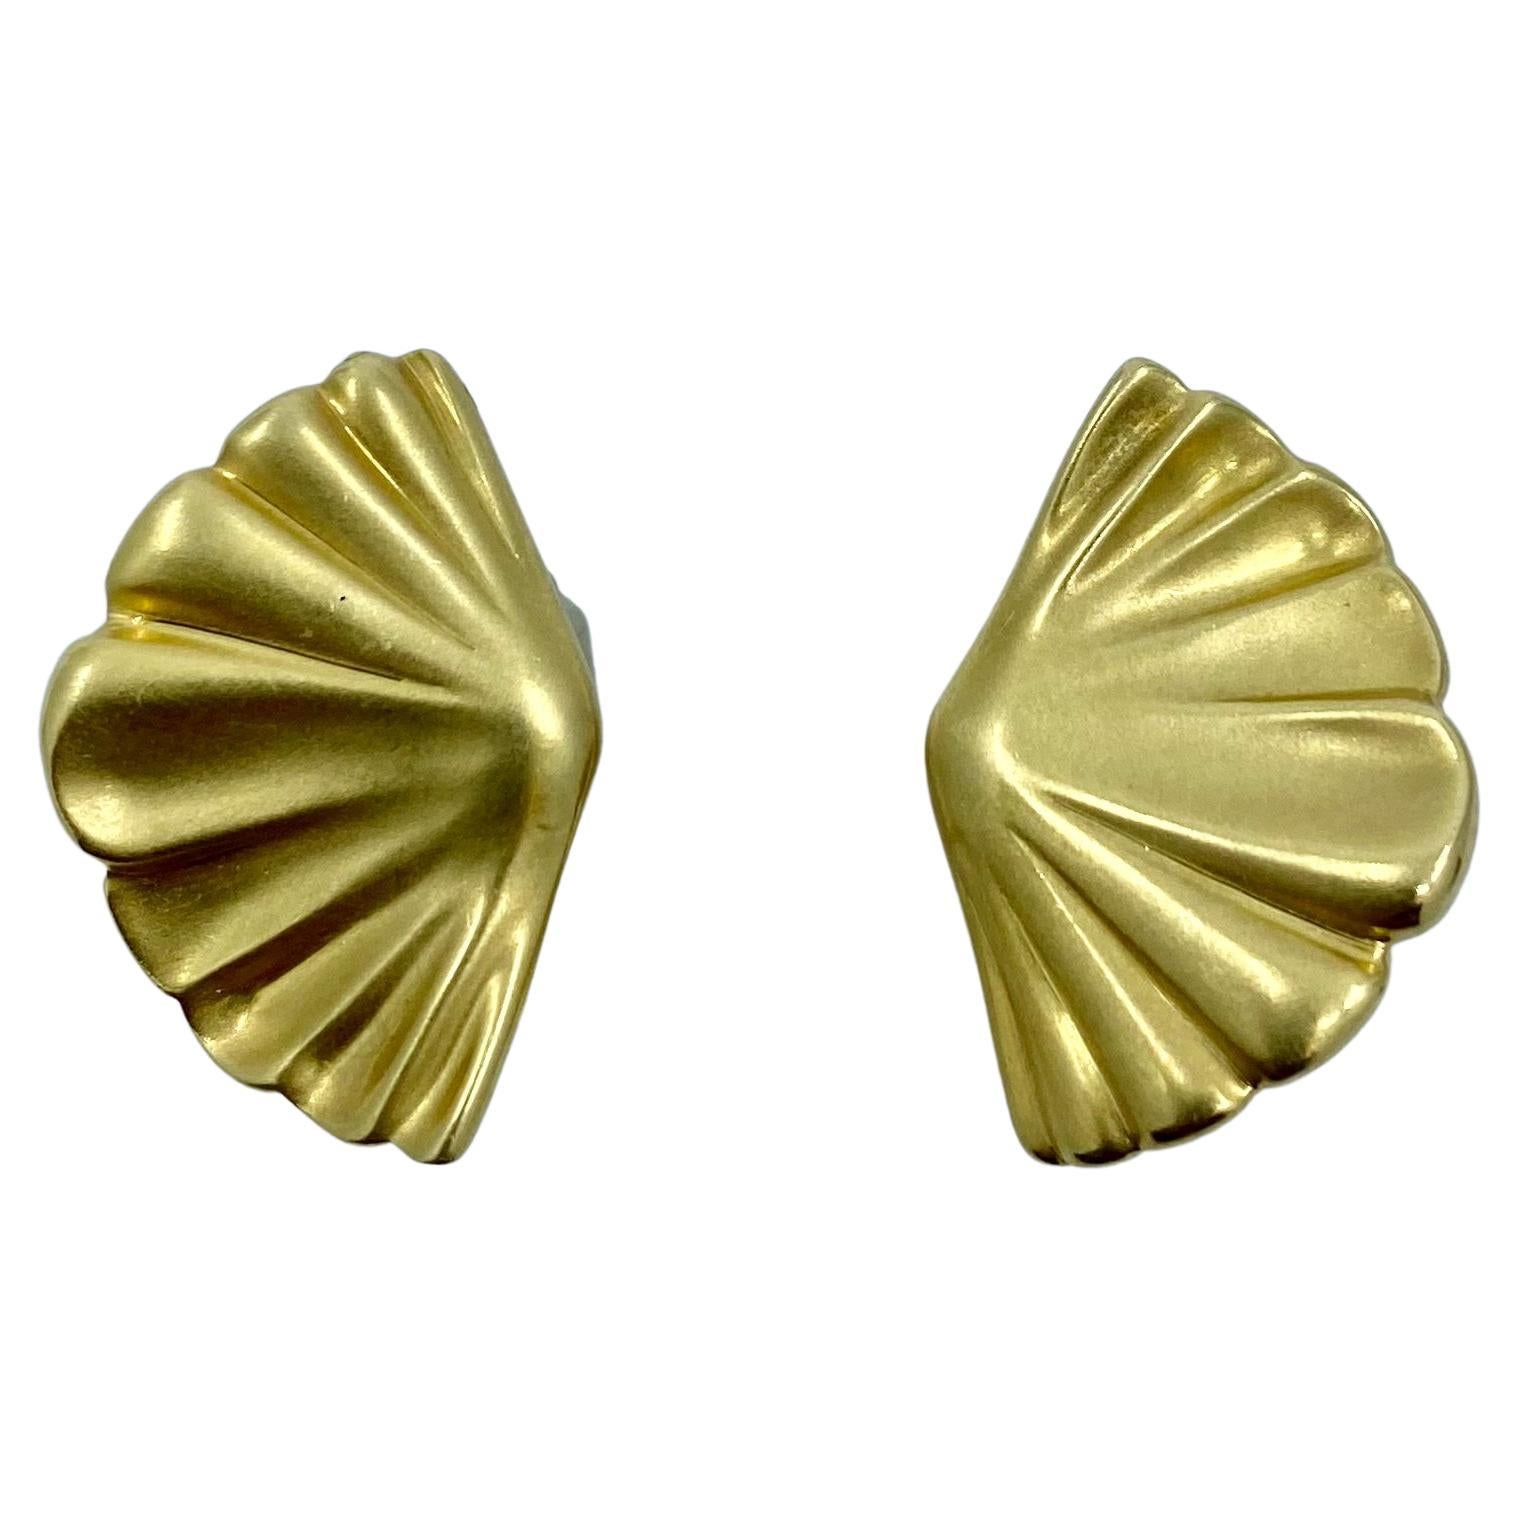 Vintage Angela Cummings Tiffany & Co. Gold Scallop Shell Earrings For Sale